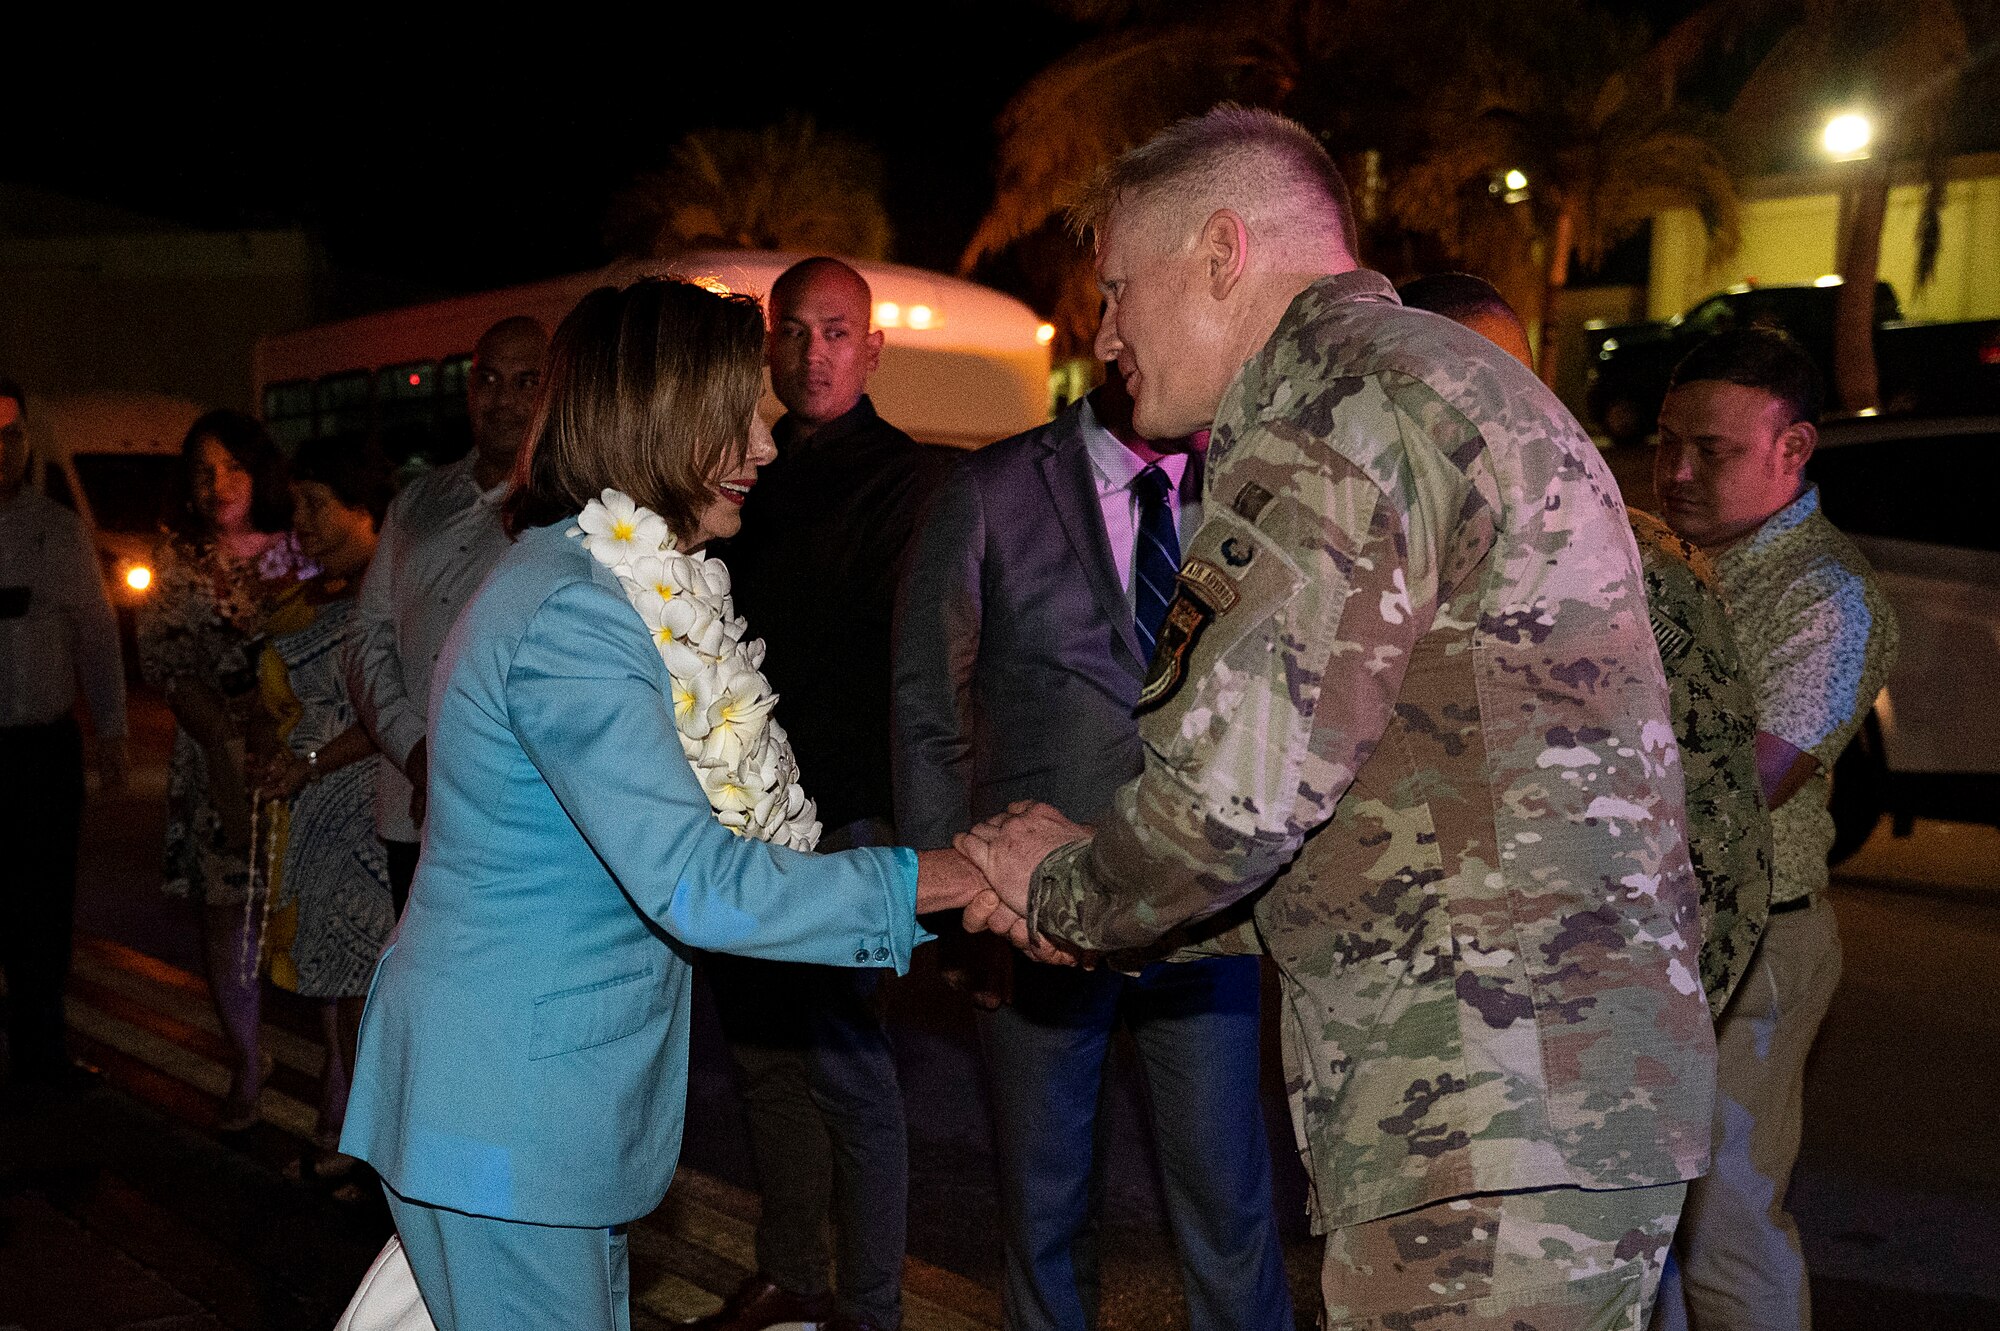 Speaker of the U.S. House of Representatives Nancy Pelosi is greeted by U.S. Air Force Brig. Gen. Paul Birch, 36th Wing commander, during a visit at Andersen Air Force Base, Guam, July 31, 2022. Pelosi visited Andersen AFB to focus on bilateral relationships, security cooperation and climate change. (U.S. Air Force photo by Staff Sgt. Suzie Plotnikov)